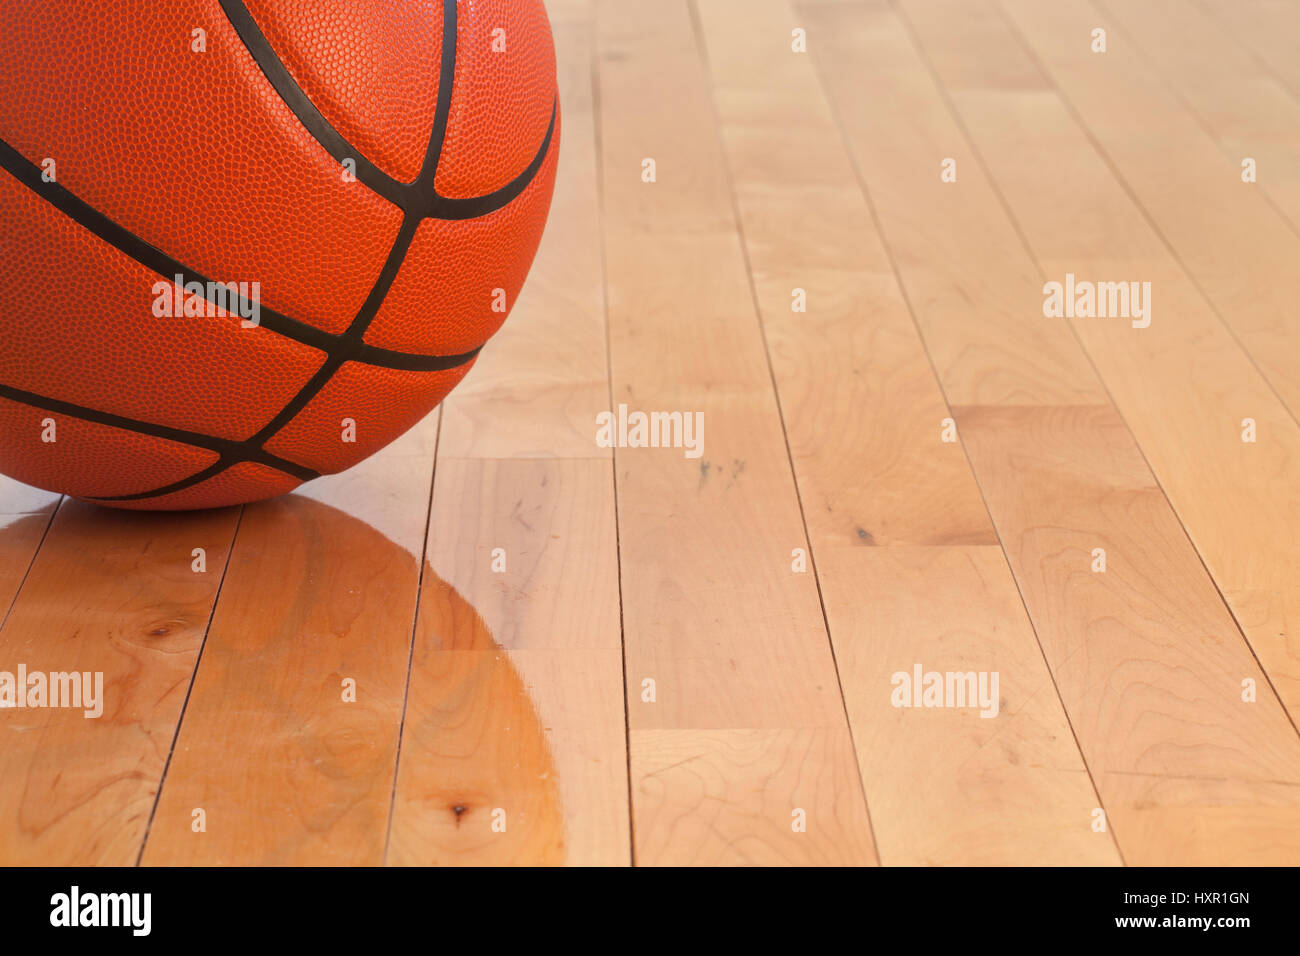 Low angle view of a basketball on a wooden gymnasium floor Stock Photo